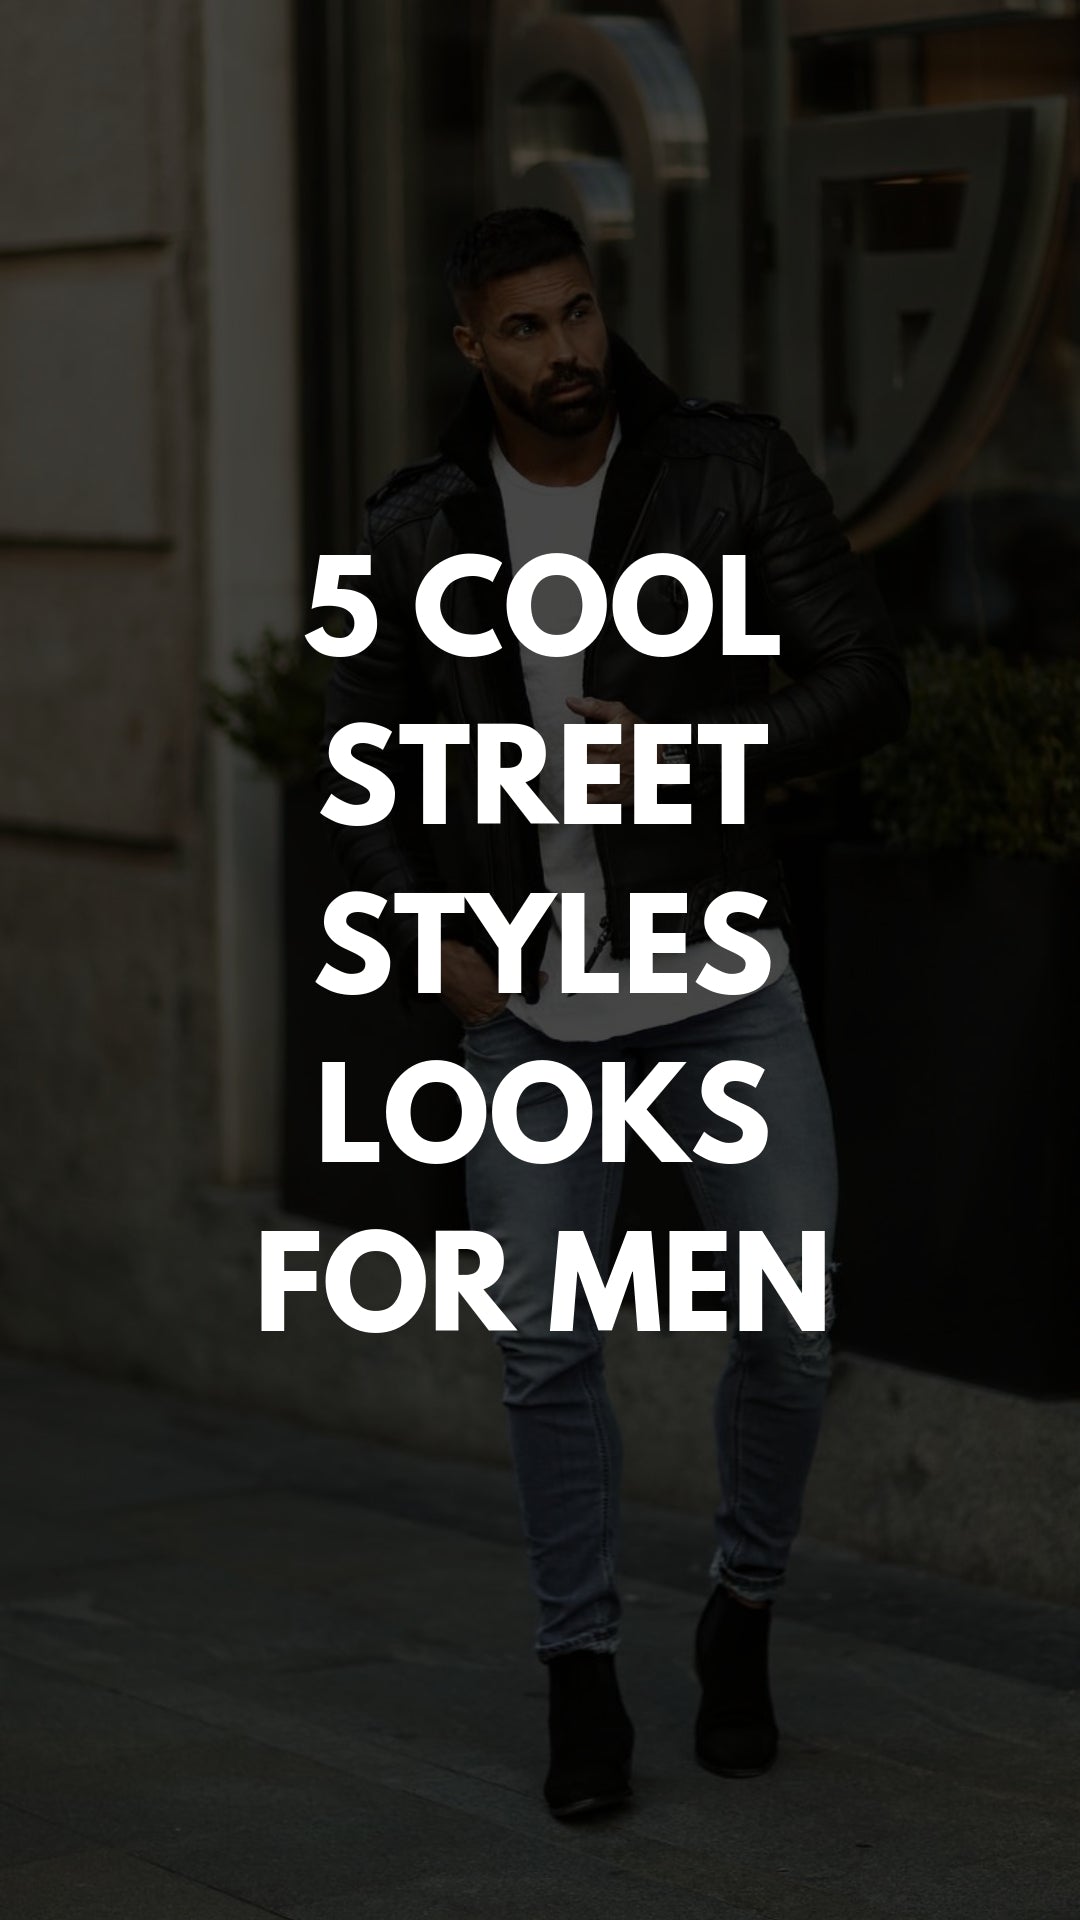 5 Outfits For Guys With Great Physique #casual #outfits #mensfashion #streetstyle